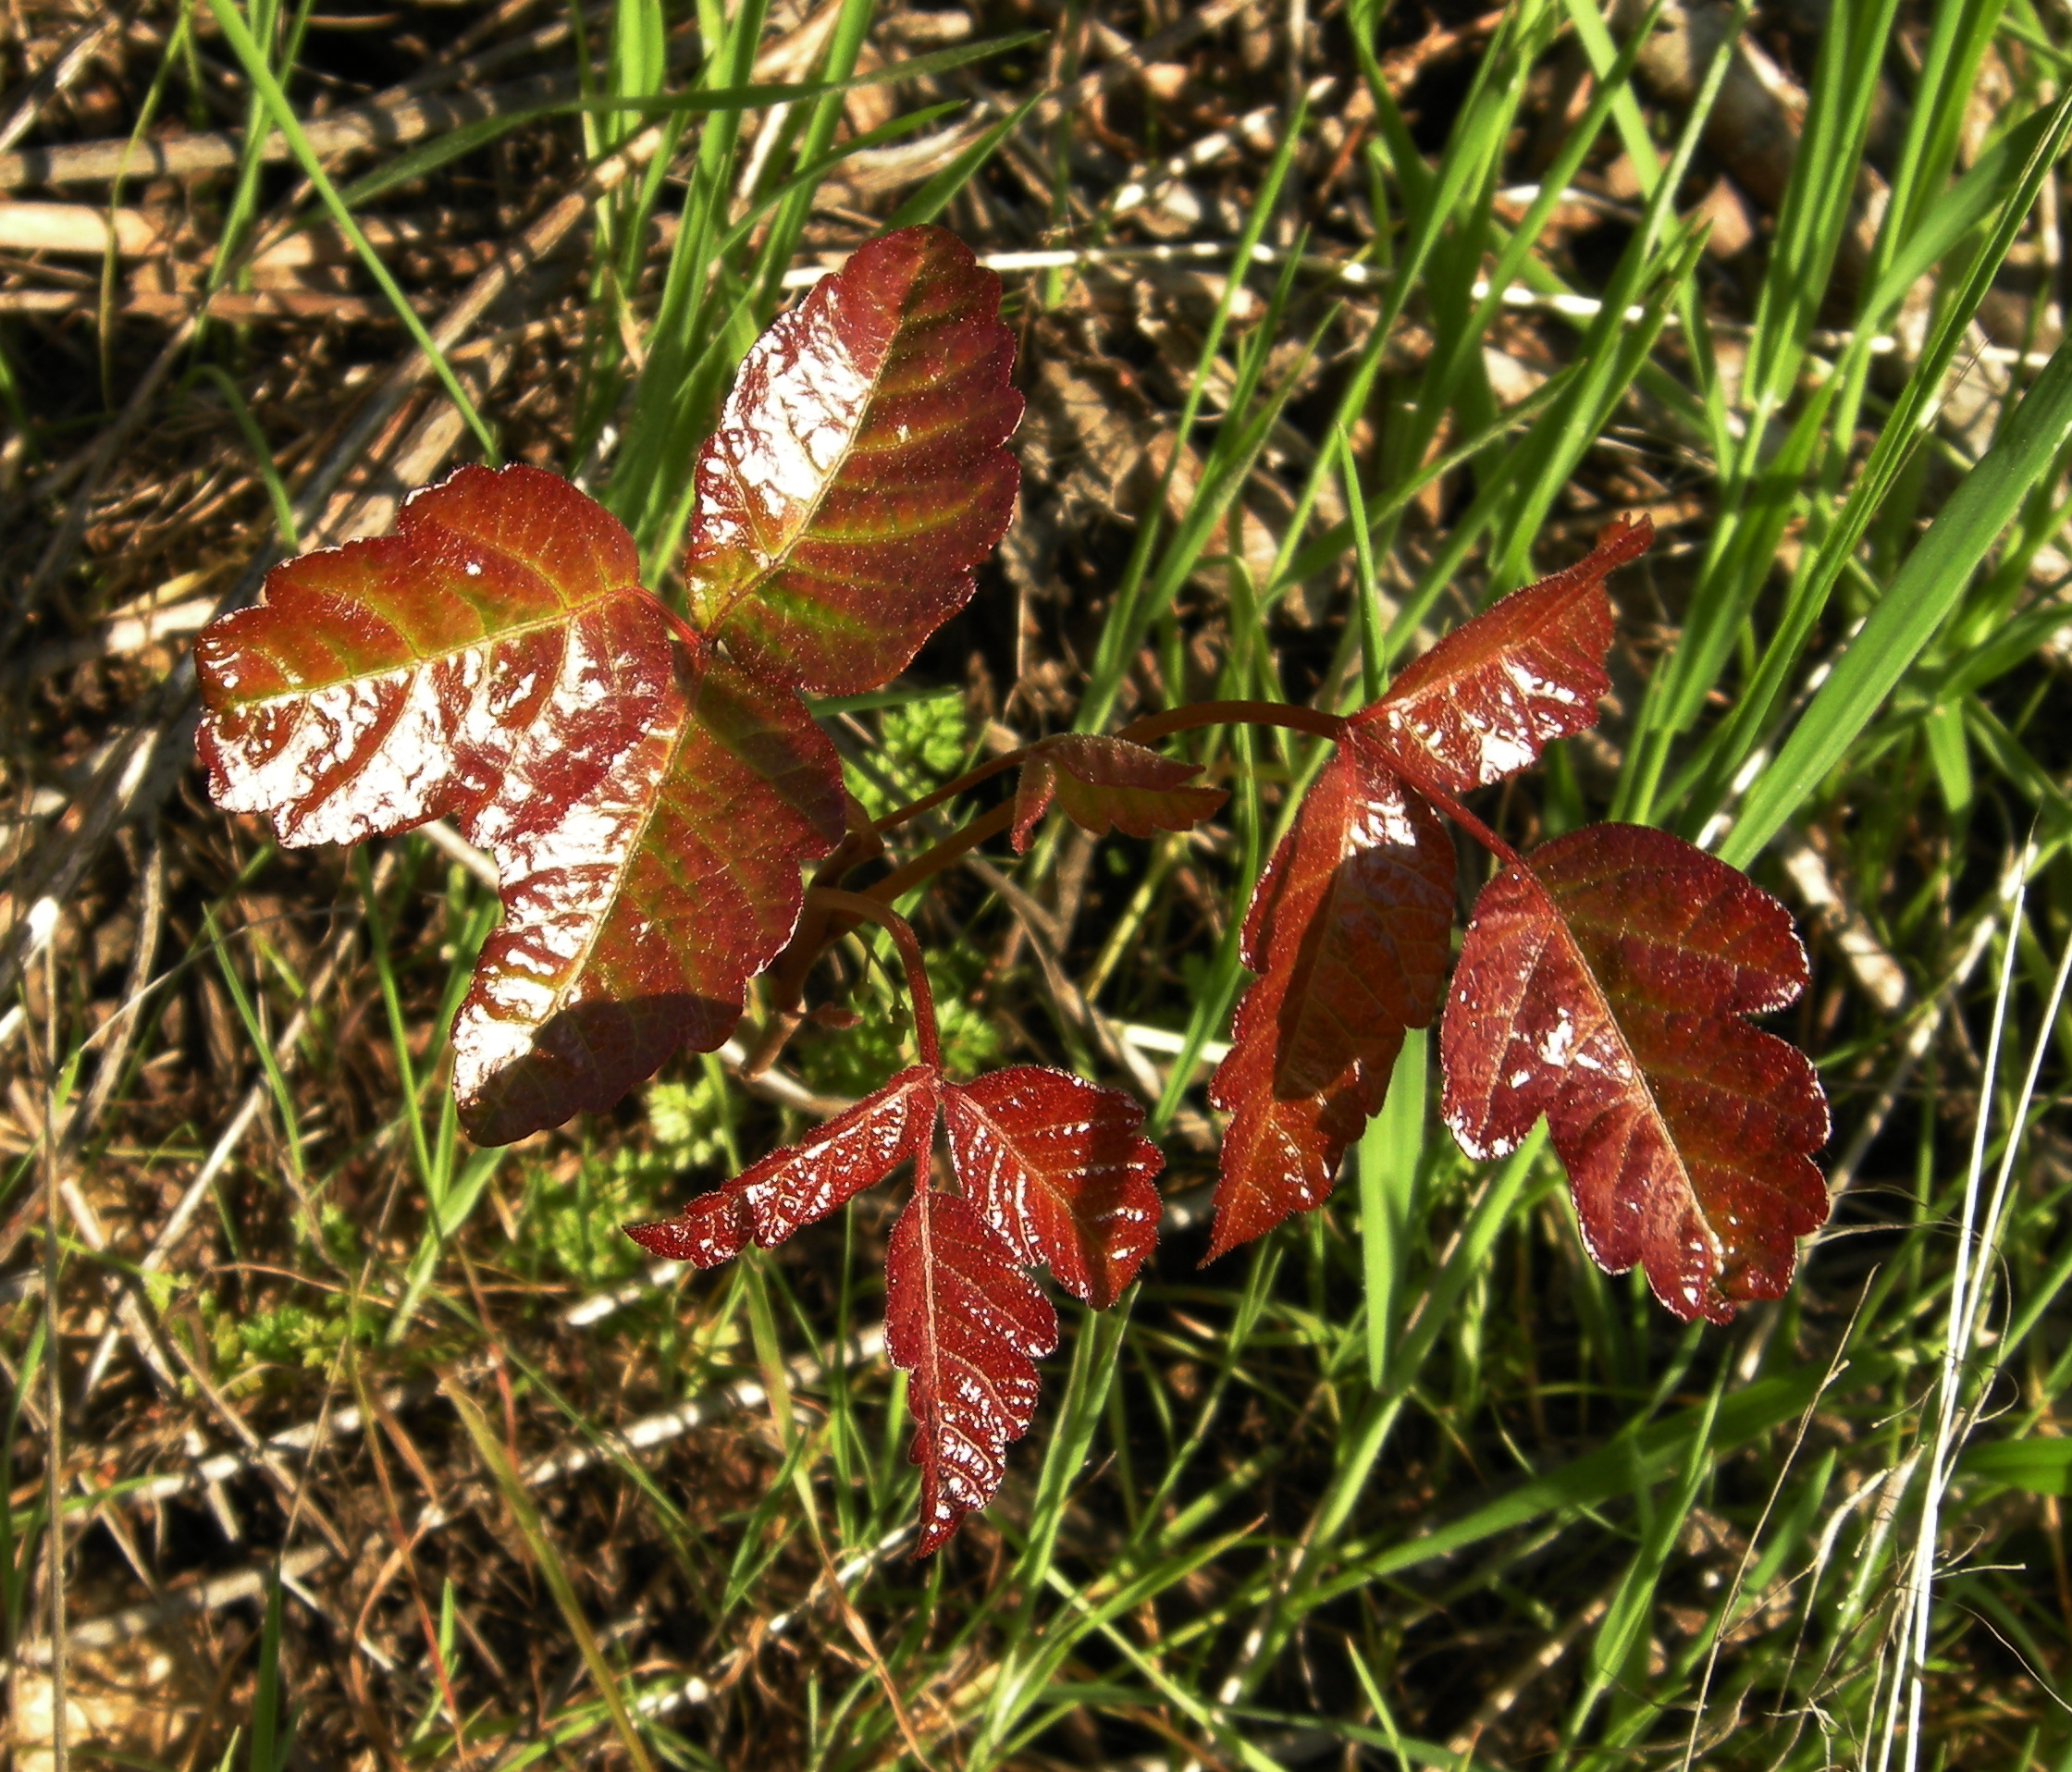 New Growth of Poison Oak with Shiny Red Leaves